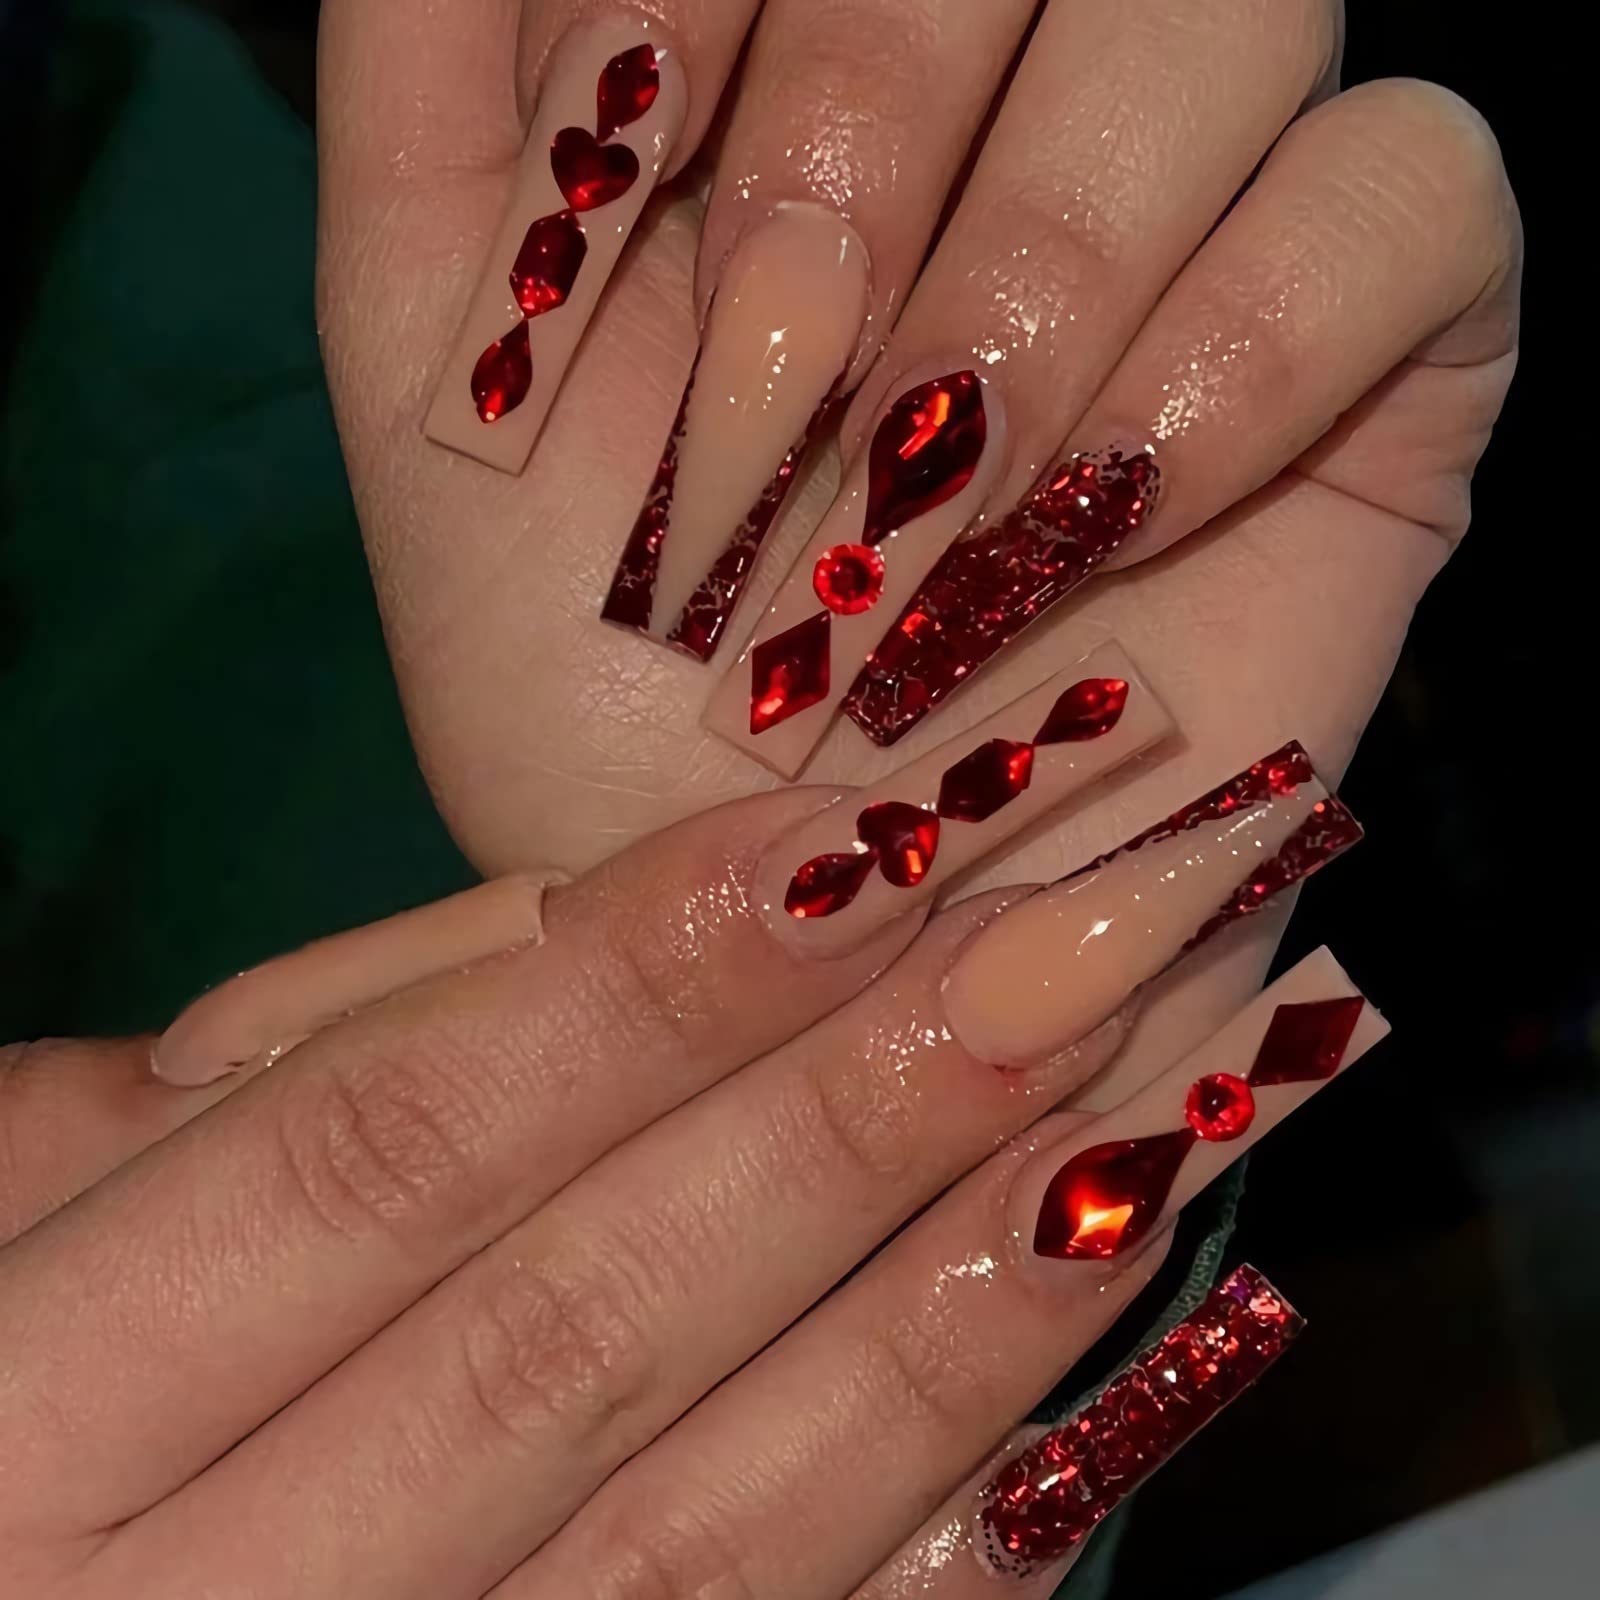 Long Press on Nails Square Acrylic Nails Black Fake Nails with Red Nail Gem  Designs False Nails Extra Long Coffin Glue on Nails Artificial Stick on